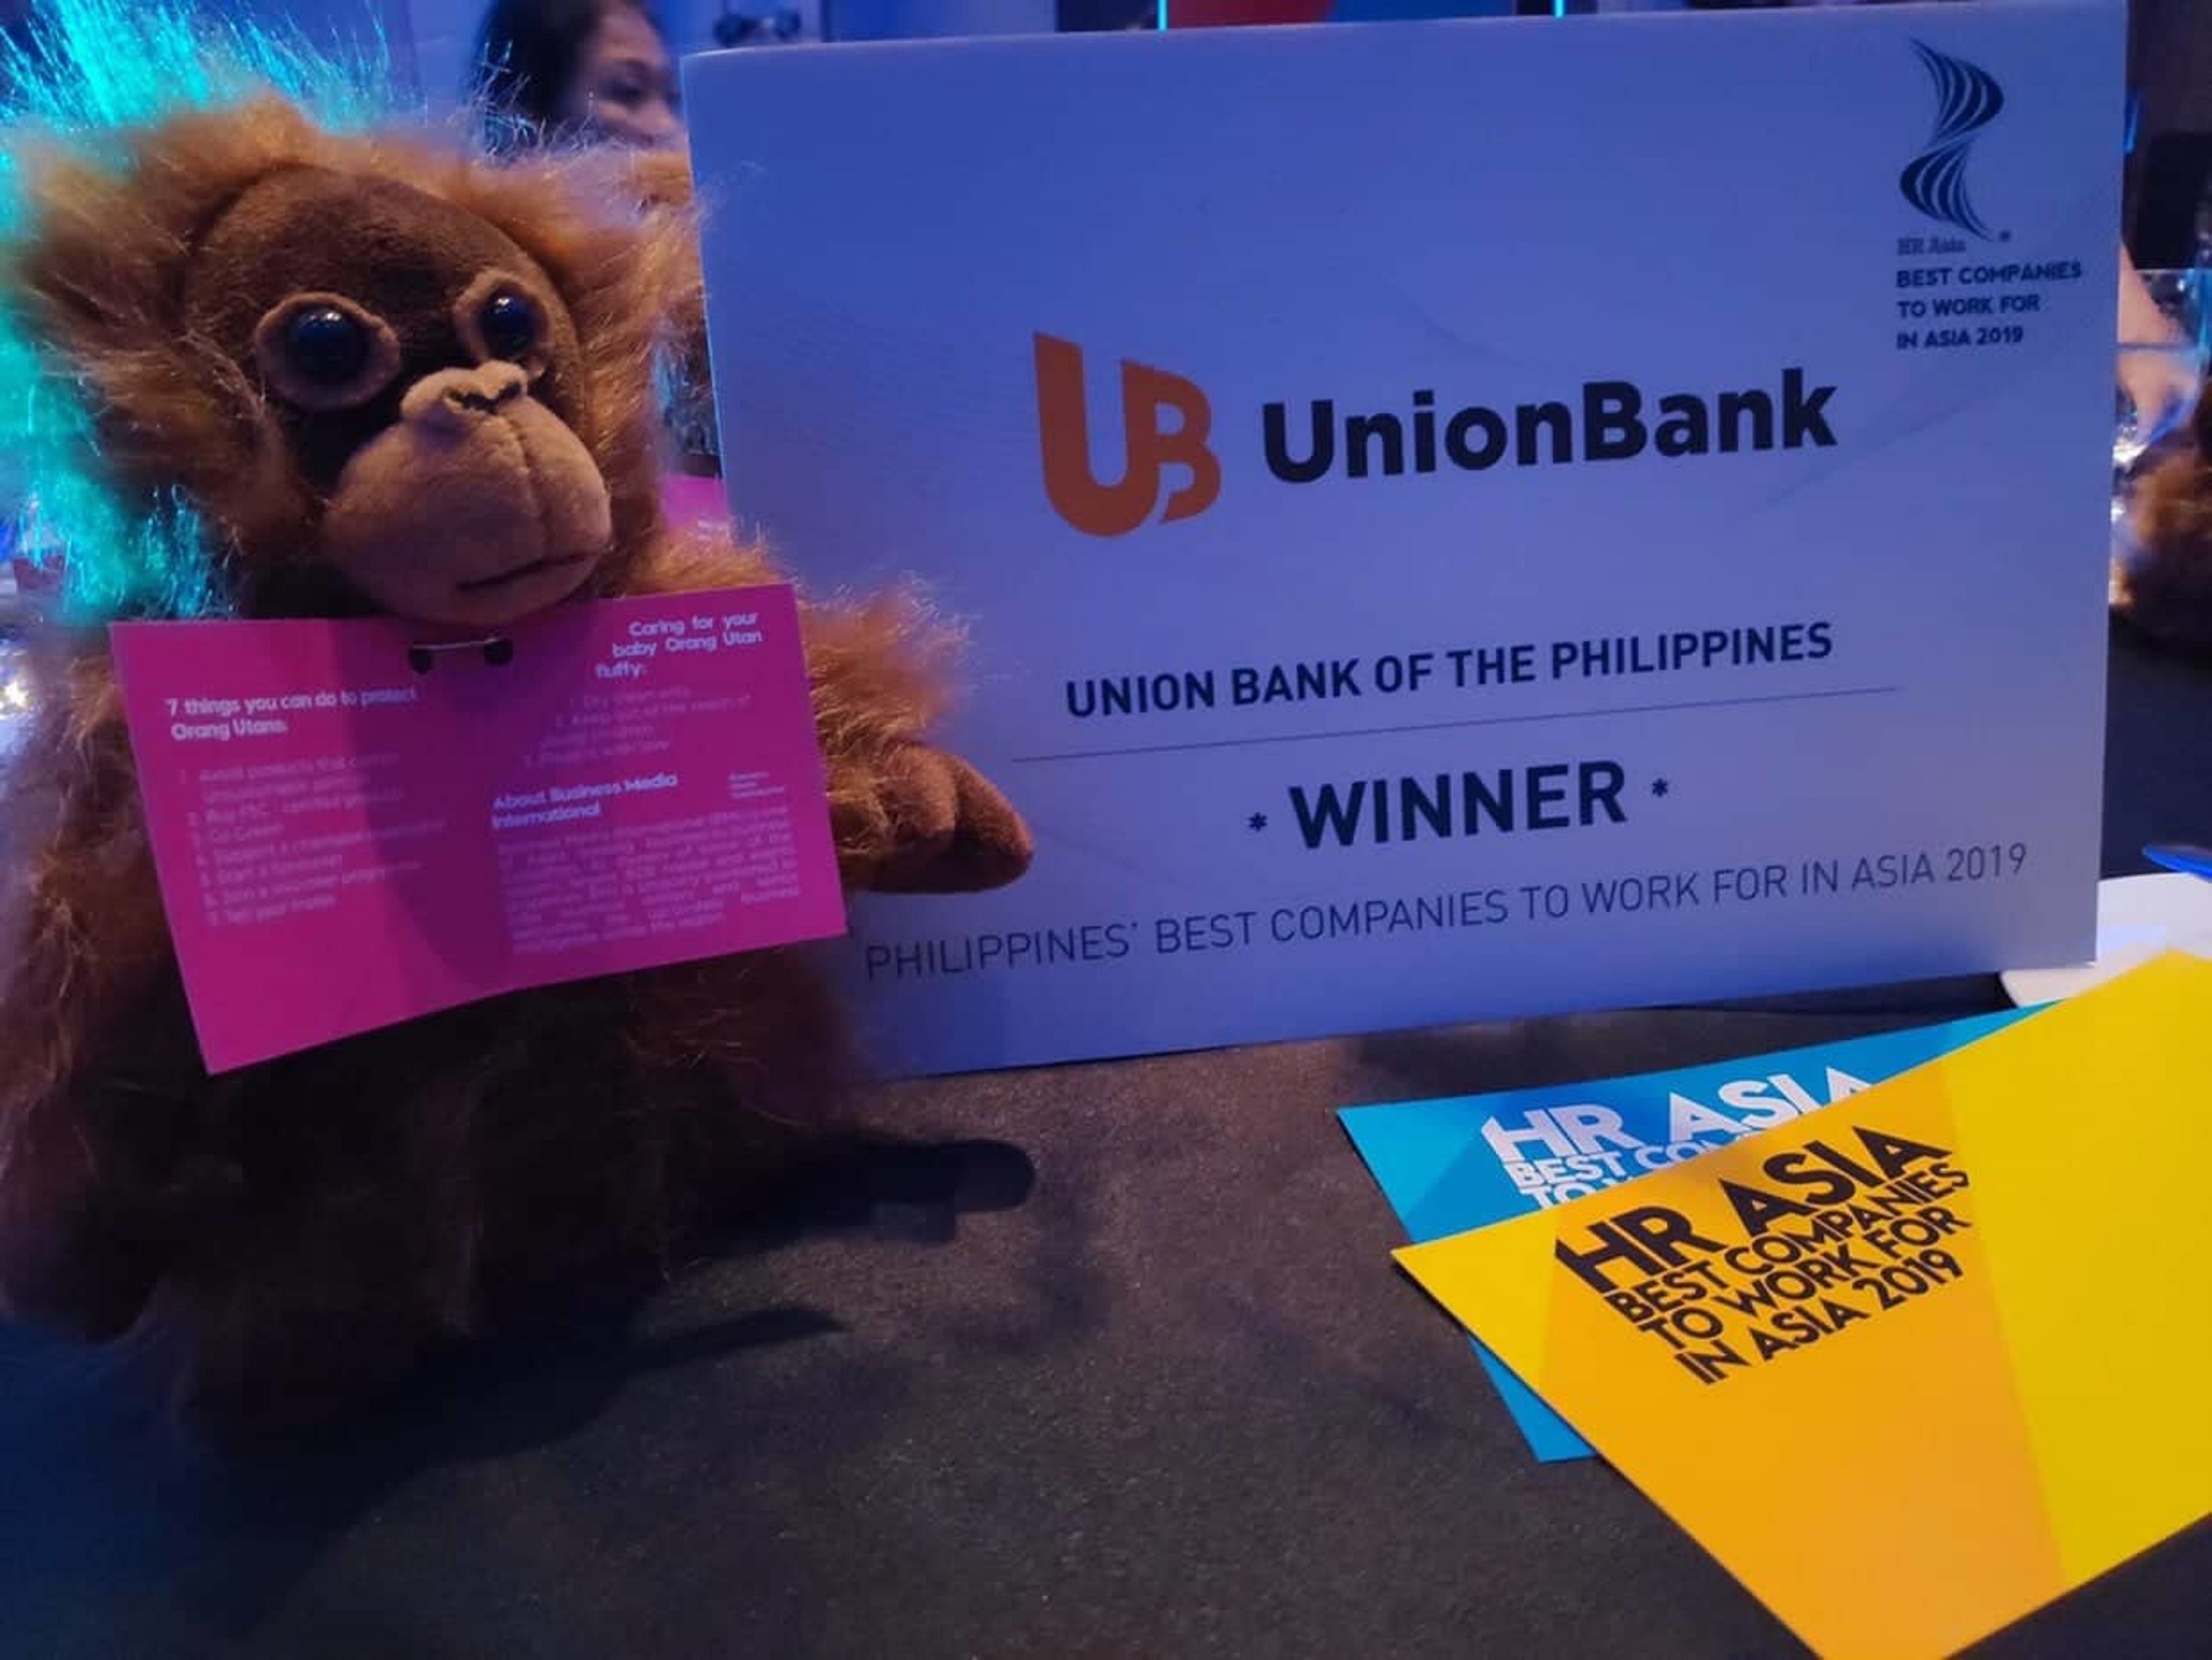 UnionBank awarded as among PH’s ‘best companies to work for in Asia’